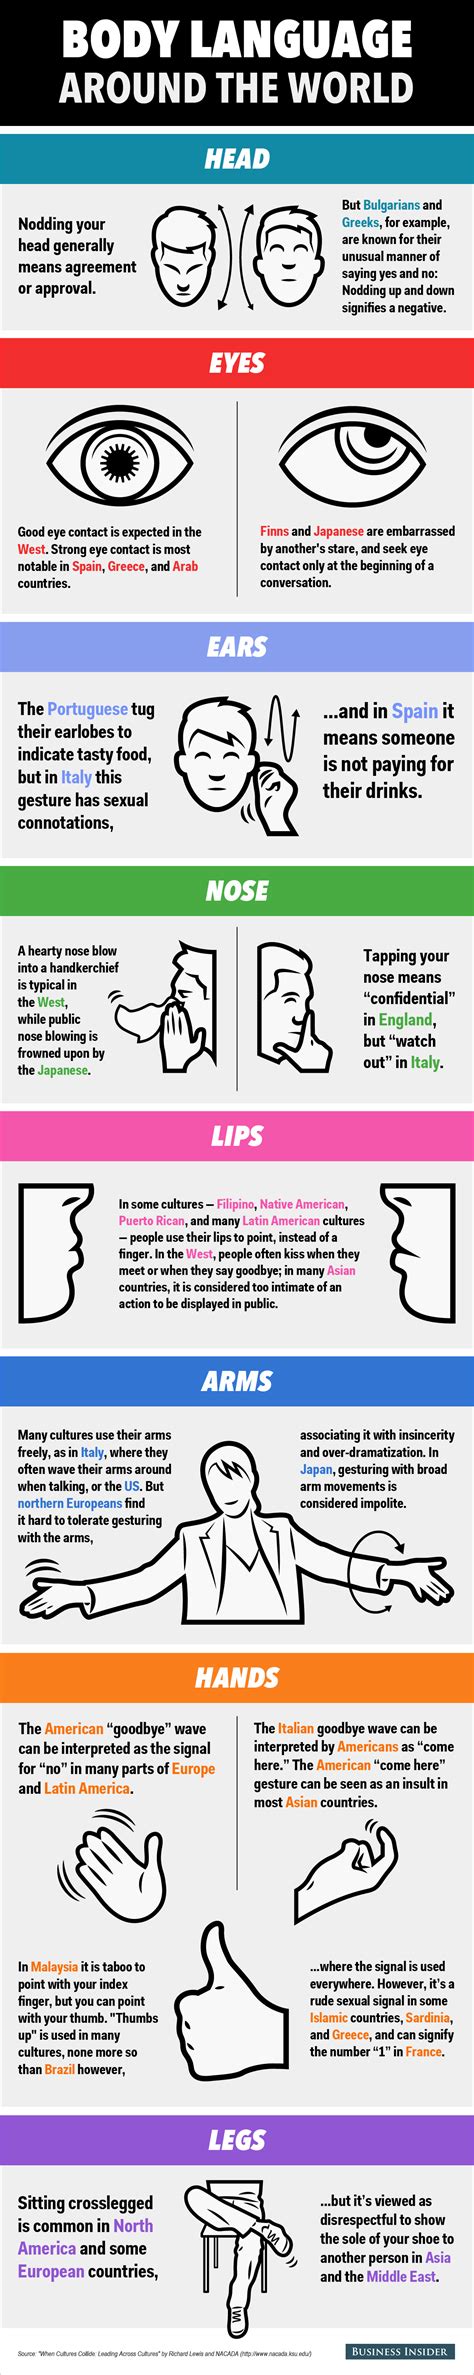 Heres A Guide To Body Language Etiquette Around The World Business